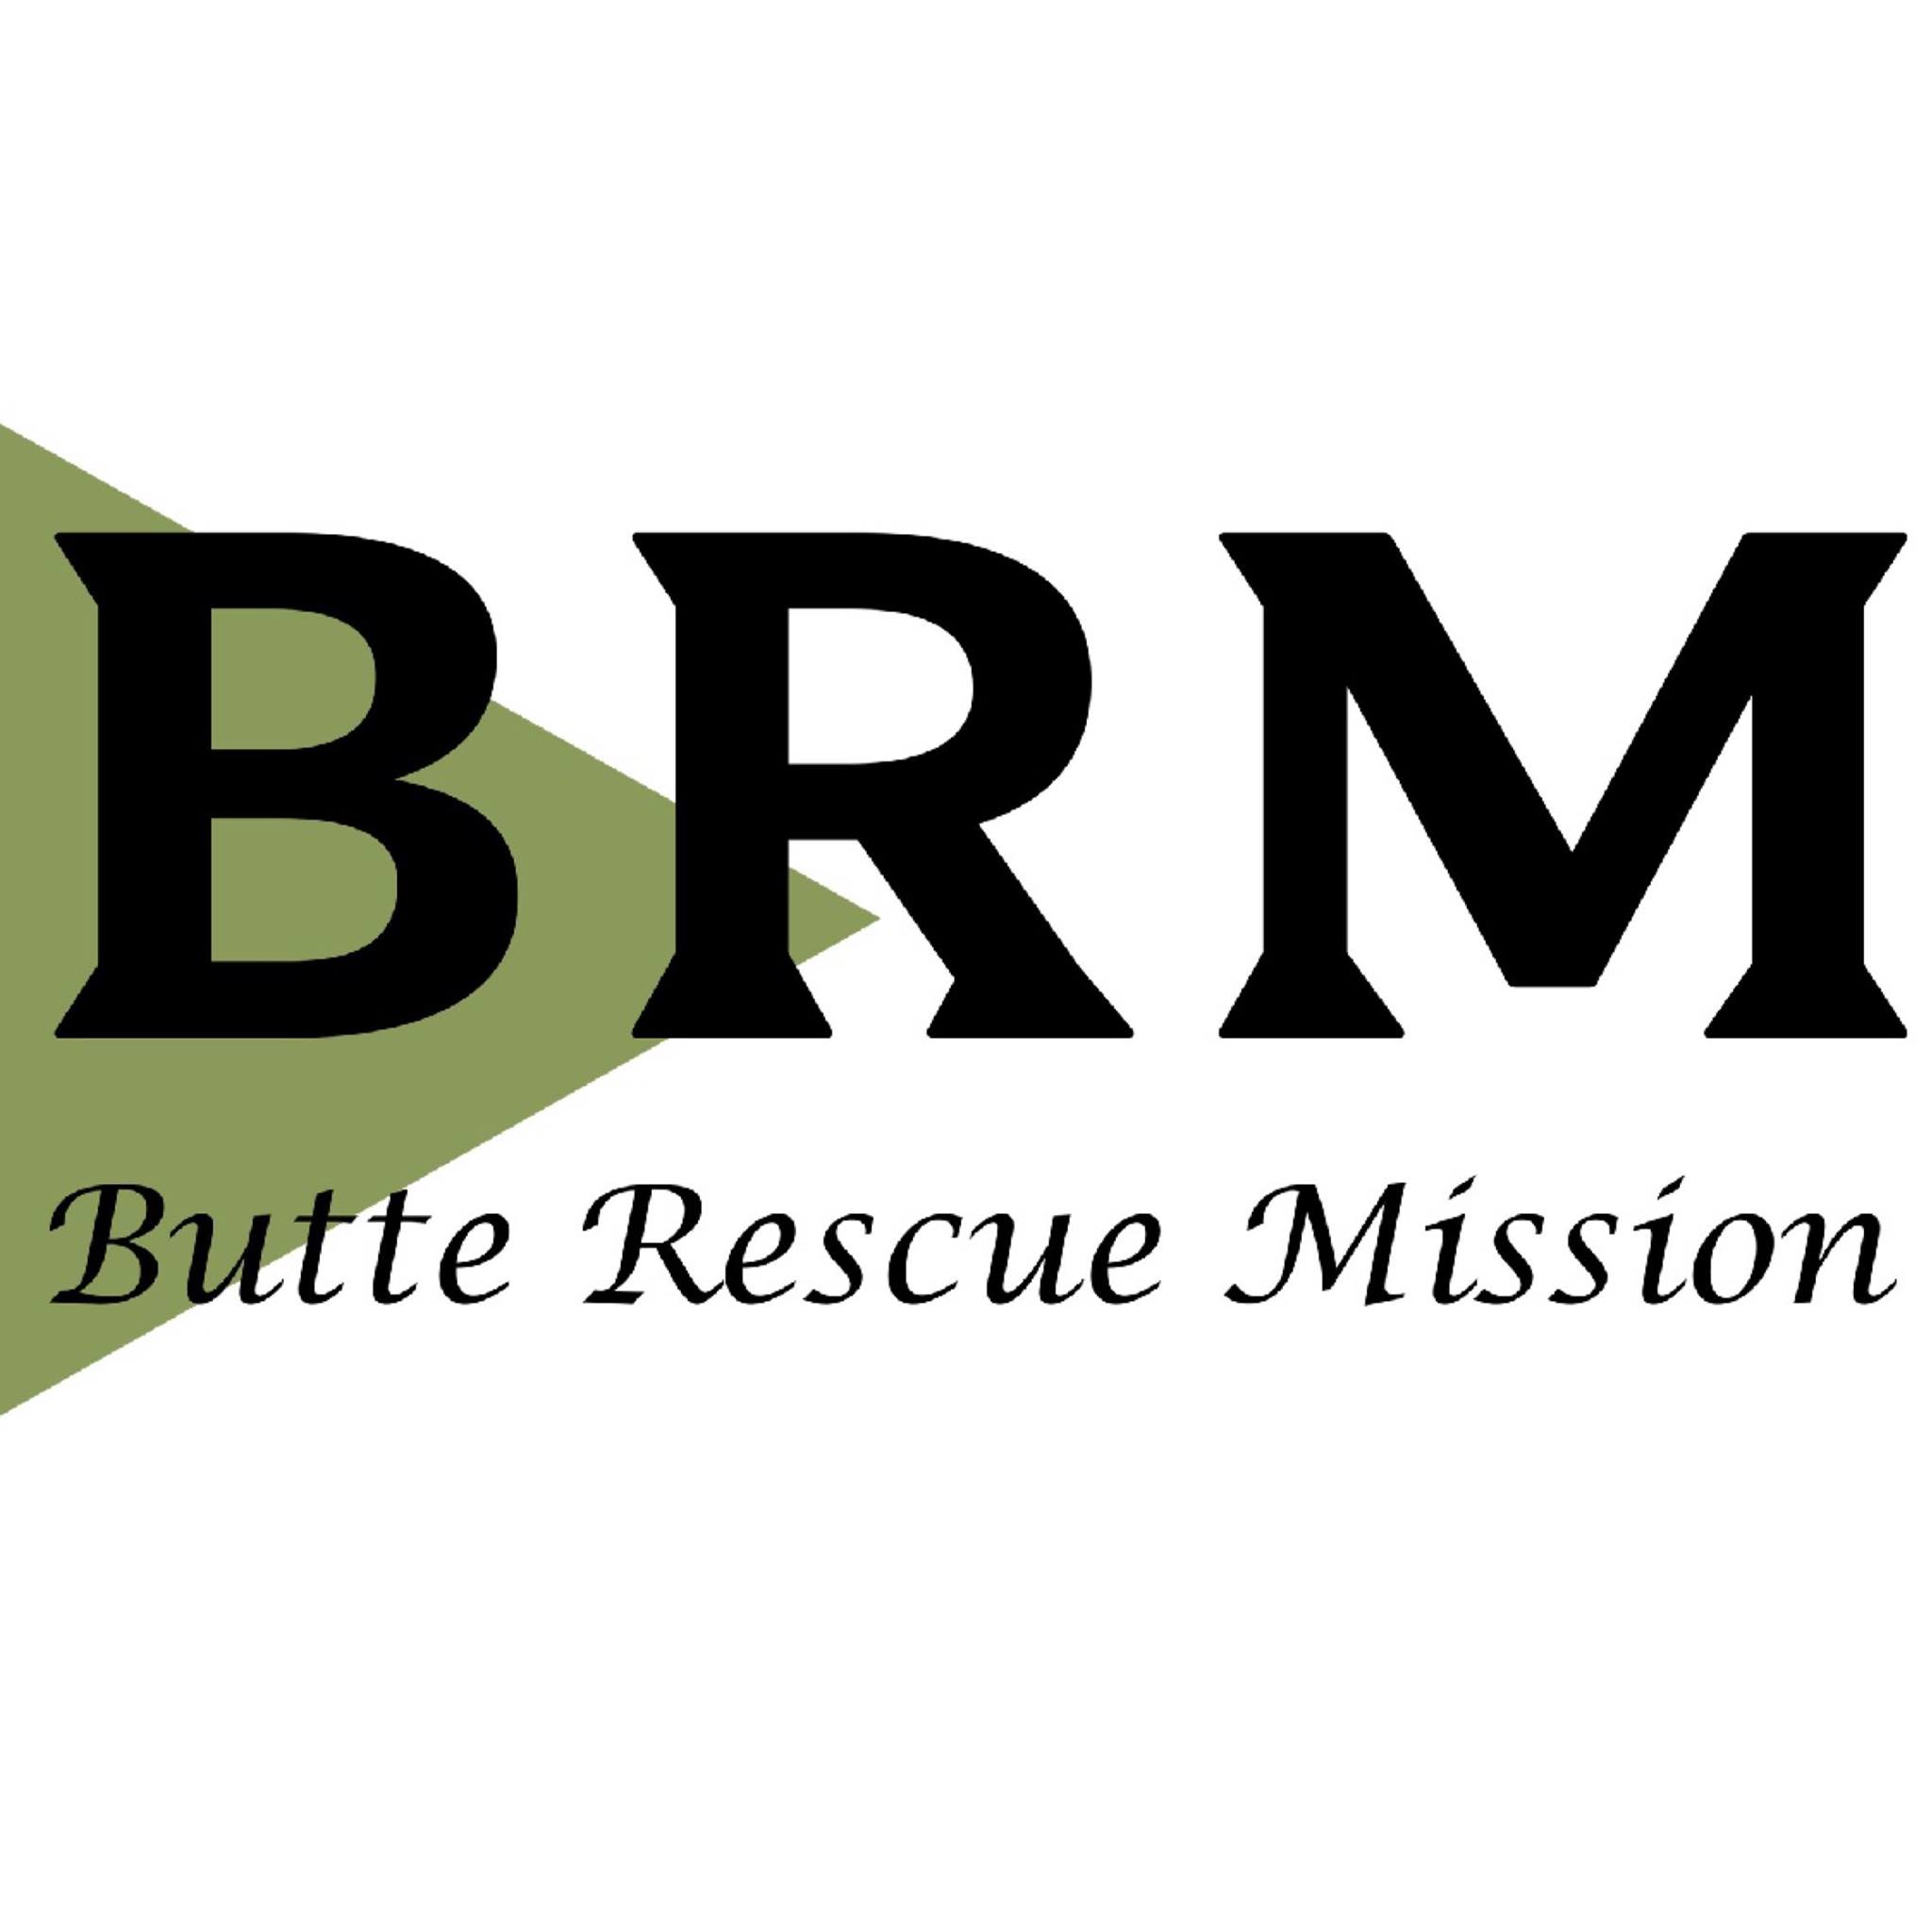 BRM - Butte Rescue Mission Emergency Shelter